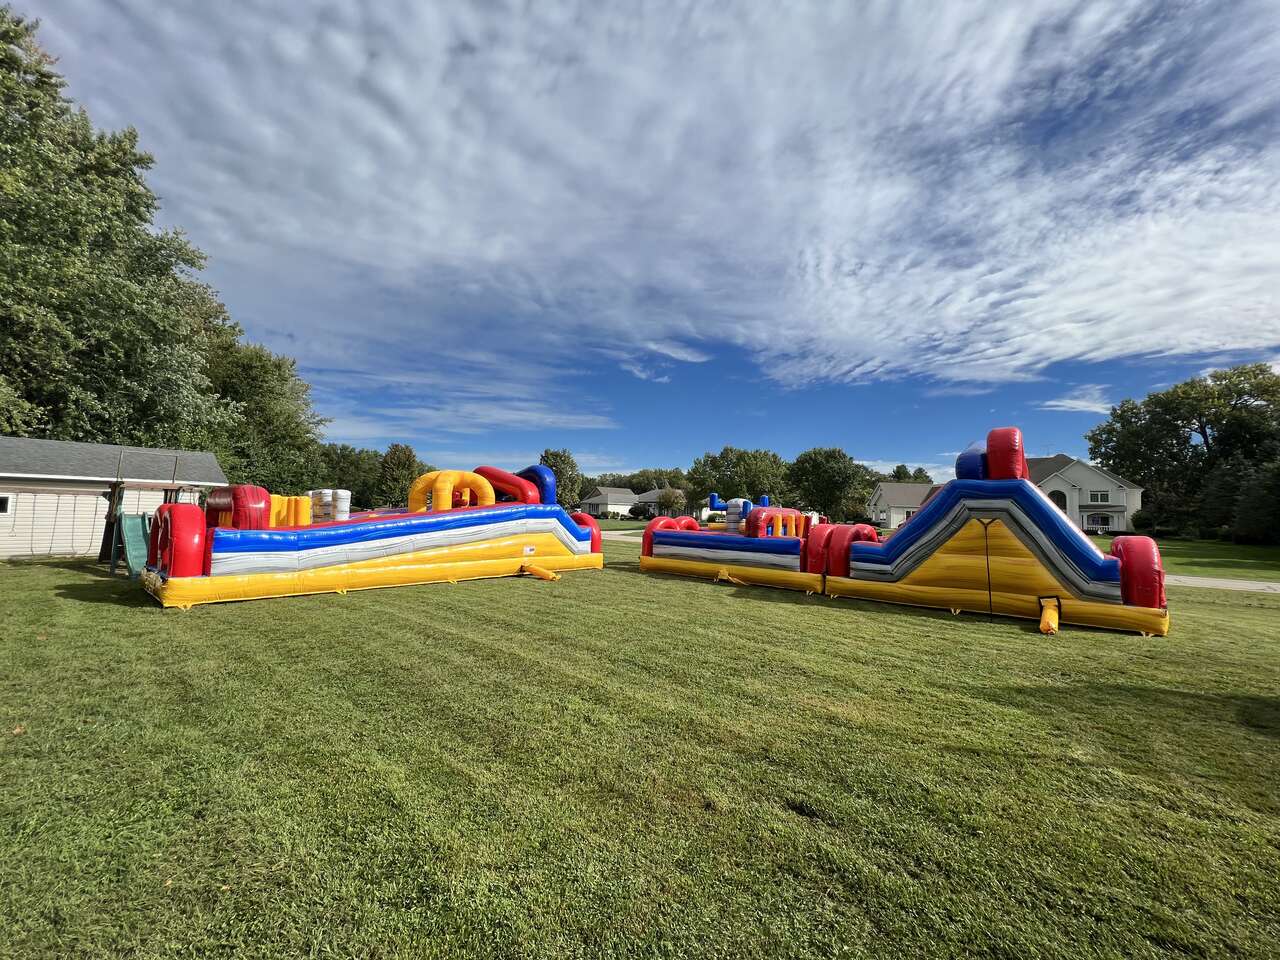 obstacles courses, from Fun Bounces Rental in Homer Glen, IL 60441